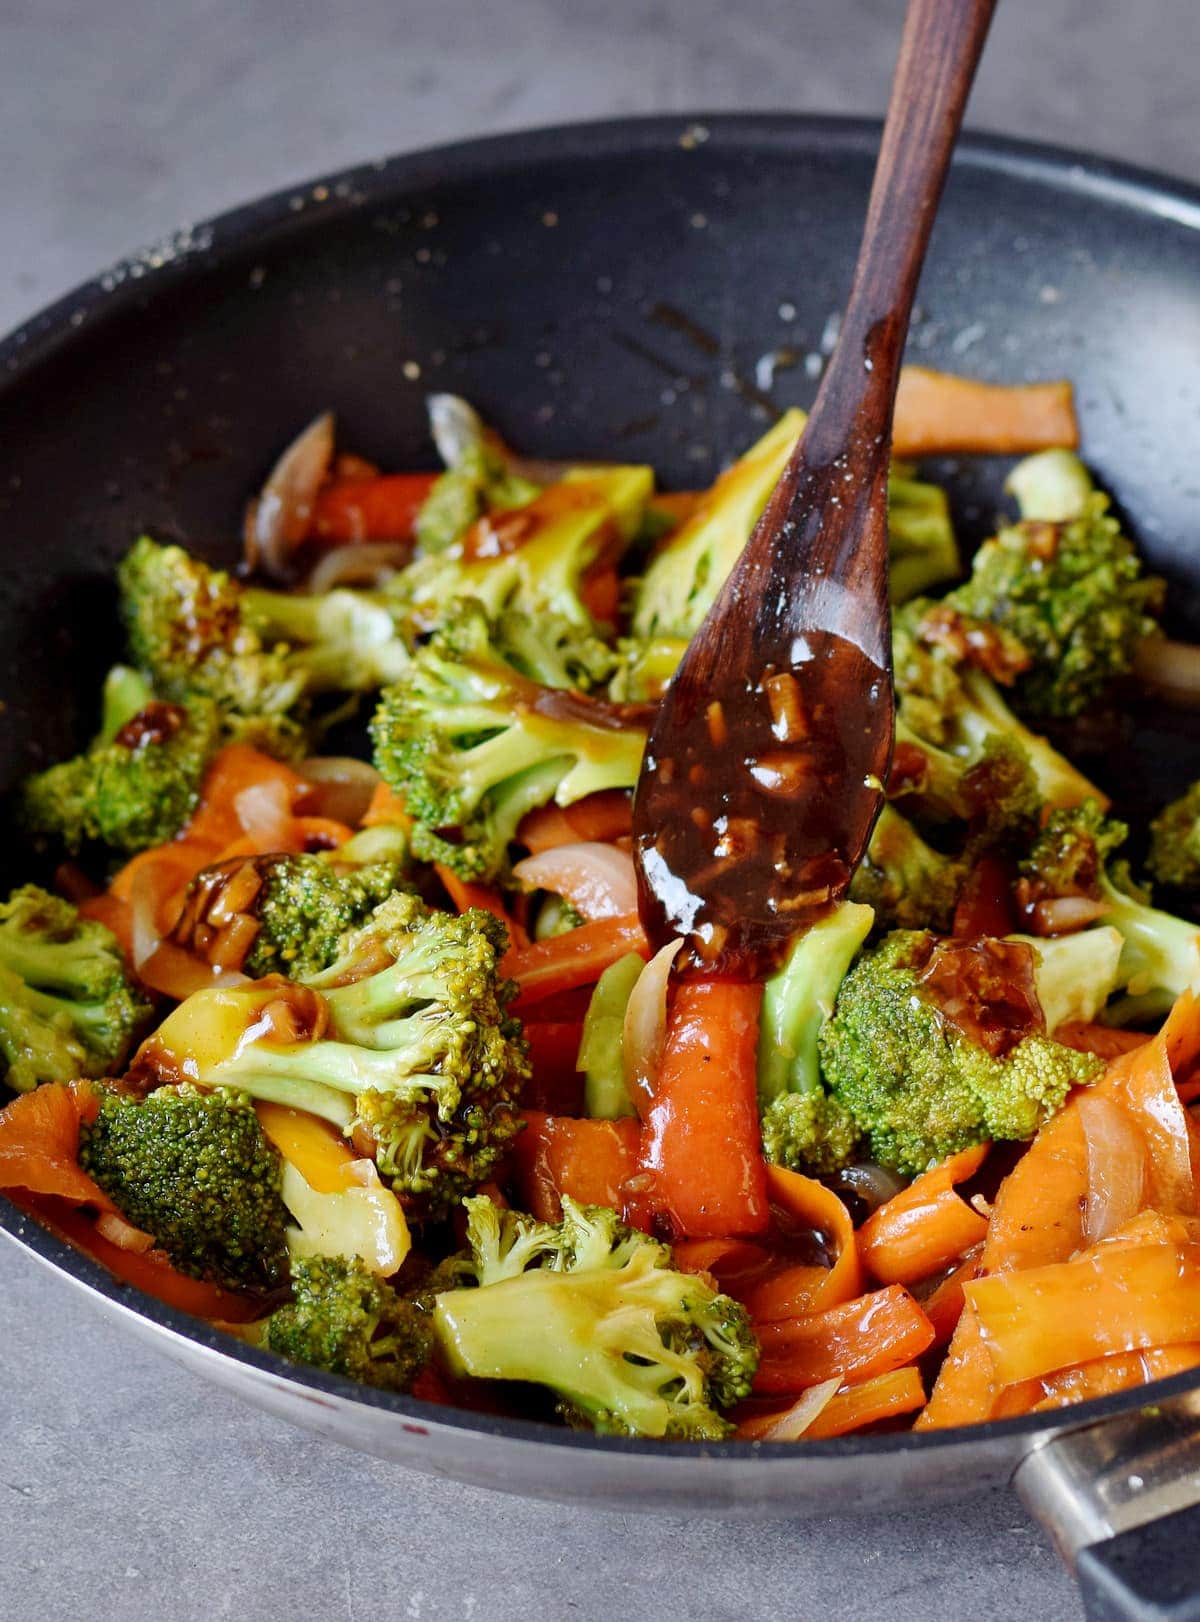 broccoli stir-fry with peppers and carrot slices in a skillet